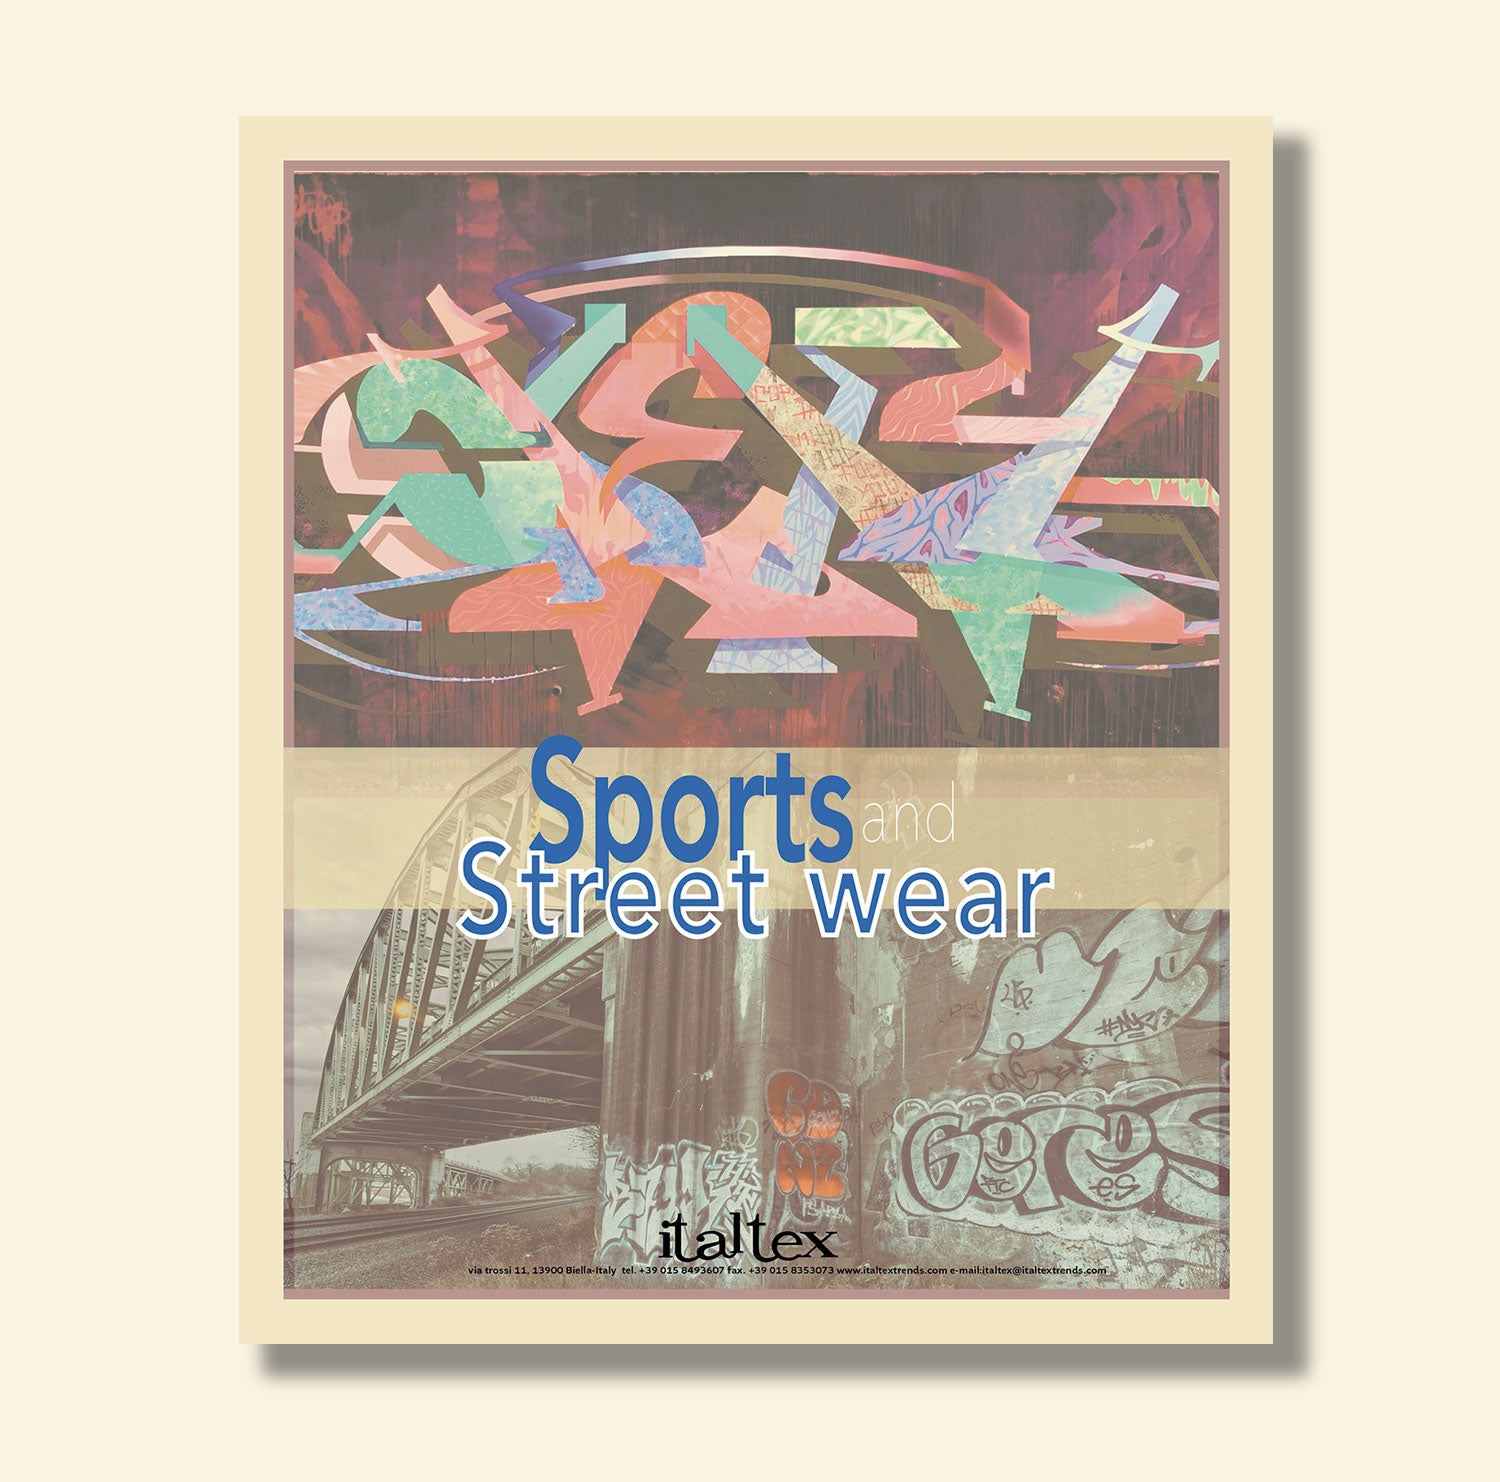 The cover of Italtexthe  Sports and Street fabric and color trend book shows two murales featuring the urban landscape